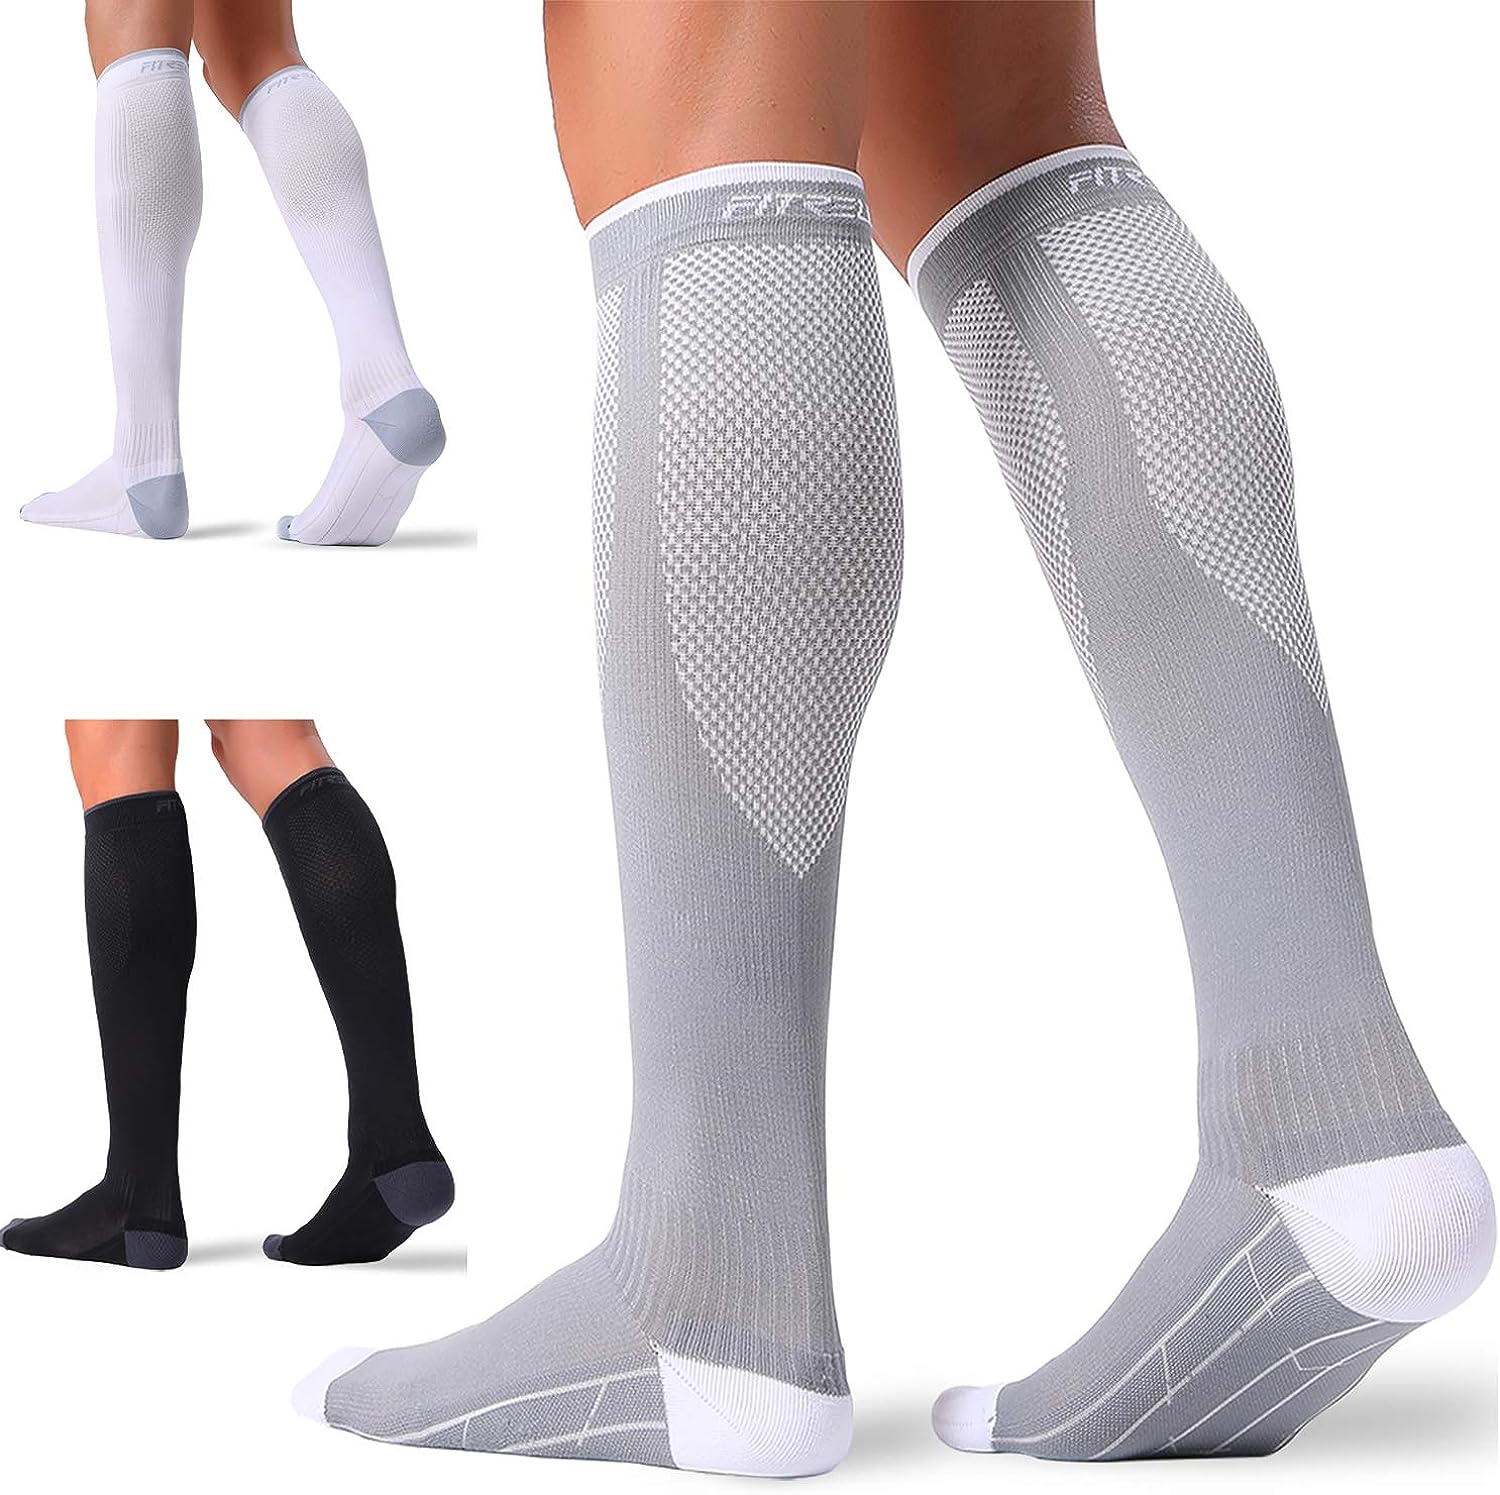 FITRELL 3 Pairs Compression Socks for Women and Men [...]